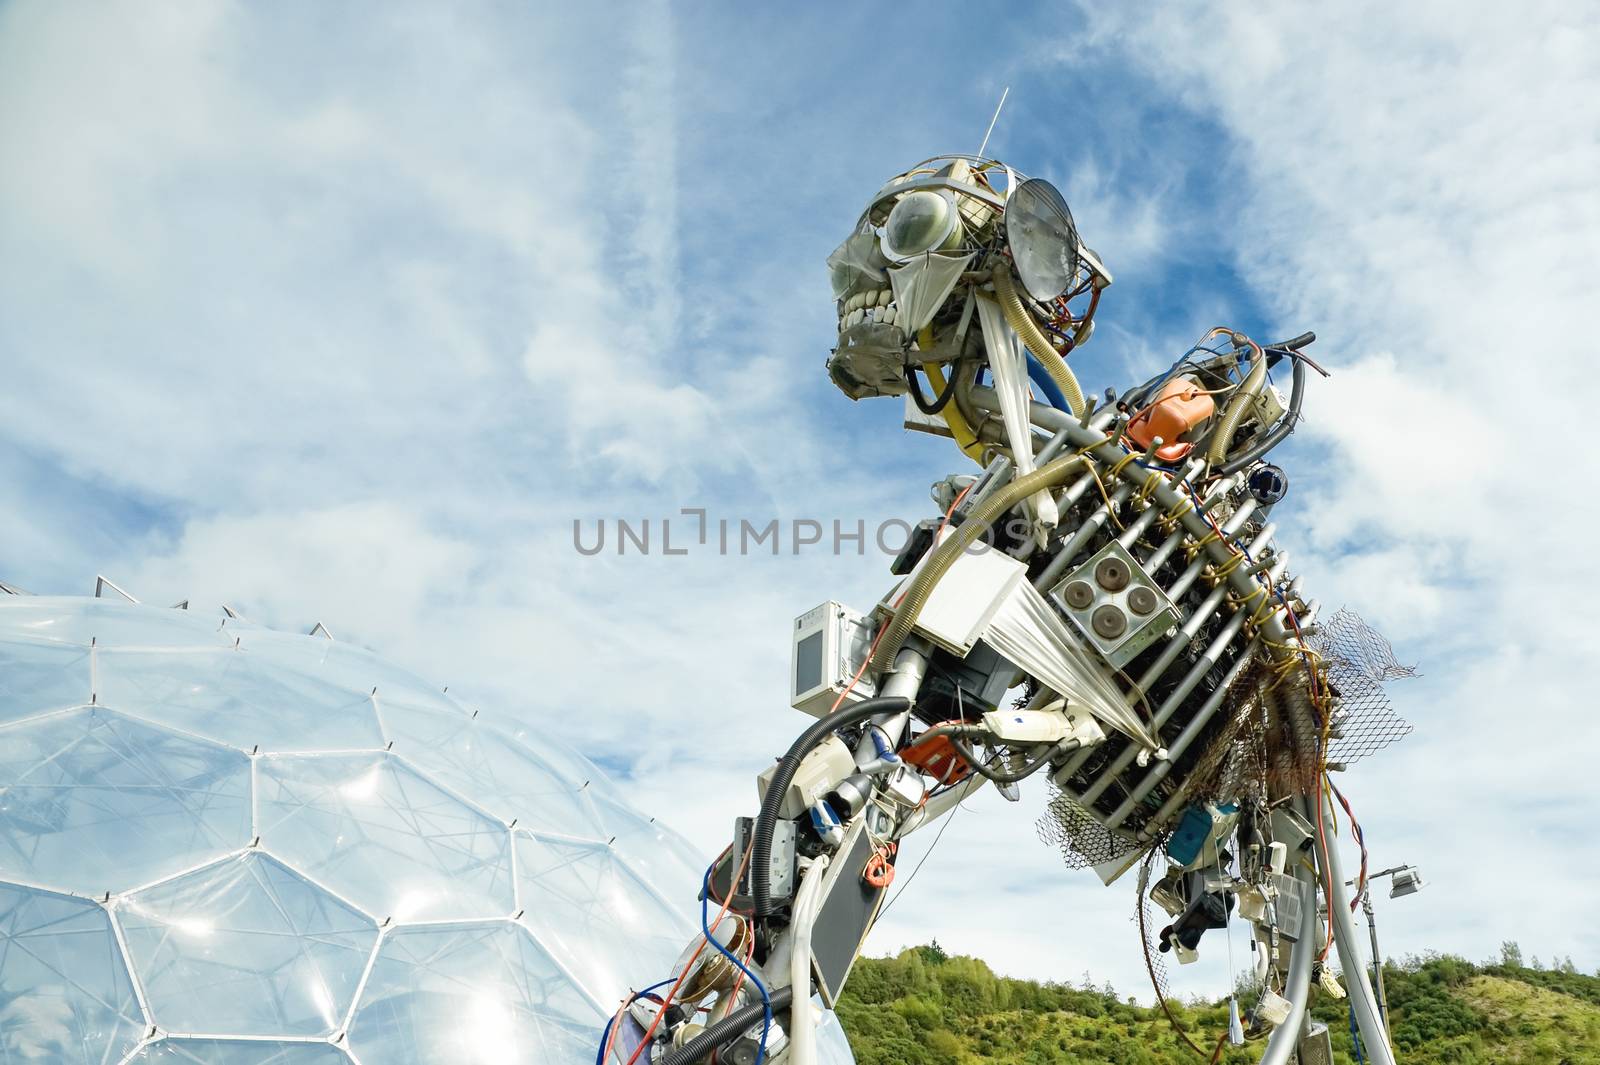 St Austell, UK - 15 September, 2011: The WEEE Man, the waste electrical and electronic equipment robot sculpture on display at the Eden Project in St Austell, UK